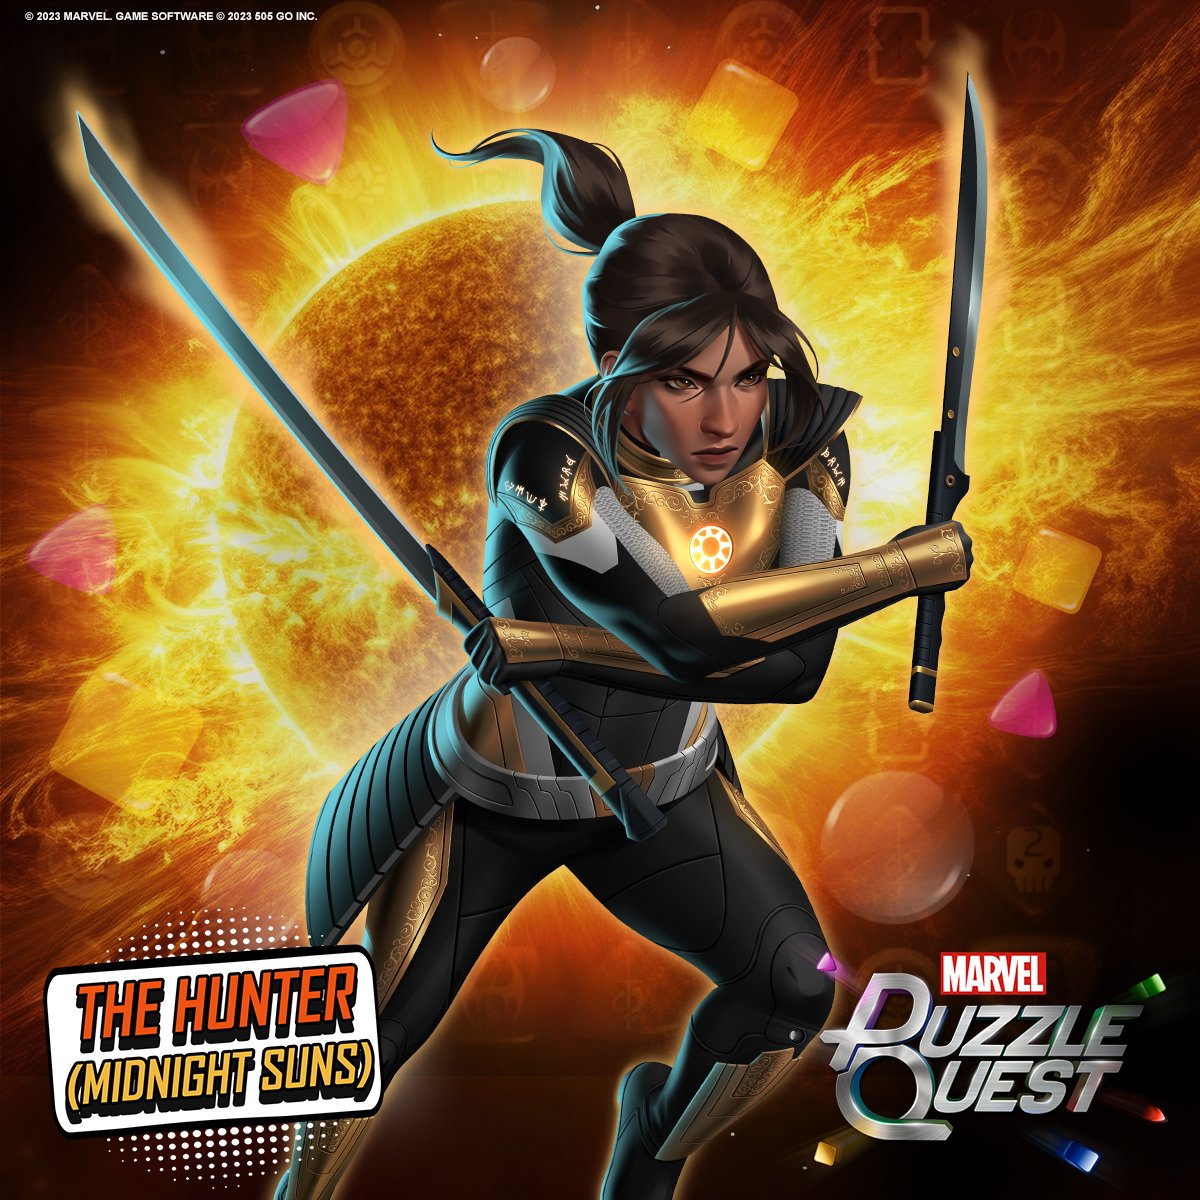 Today we're excited to announce that The Hunter will be joining @MarvelPuzzle Quest's roster as part of a Midnight Suns takeover event to cap off their momentous 10-year celebration: mpq.social/MidnightSuns Check out our blog for all the details: midnightsuns.2k.com/latest/marvel-…